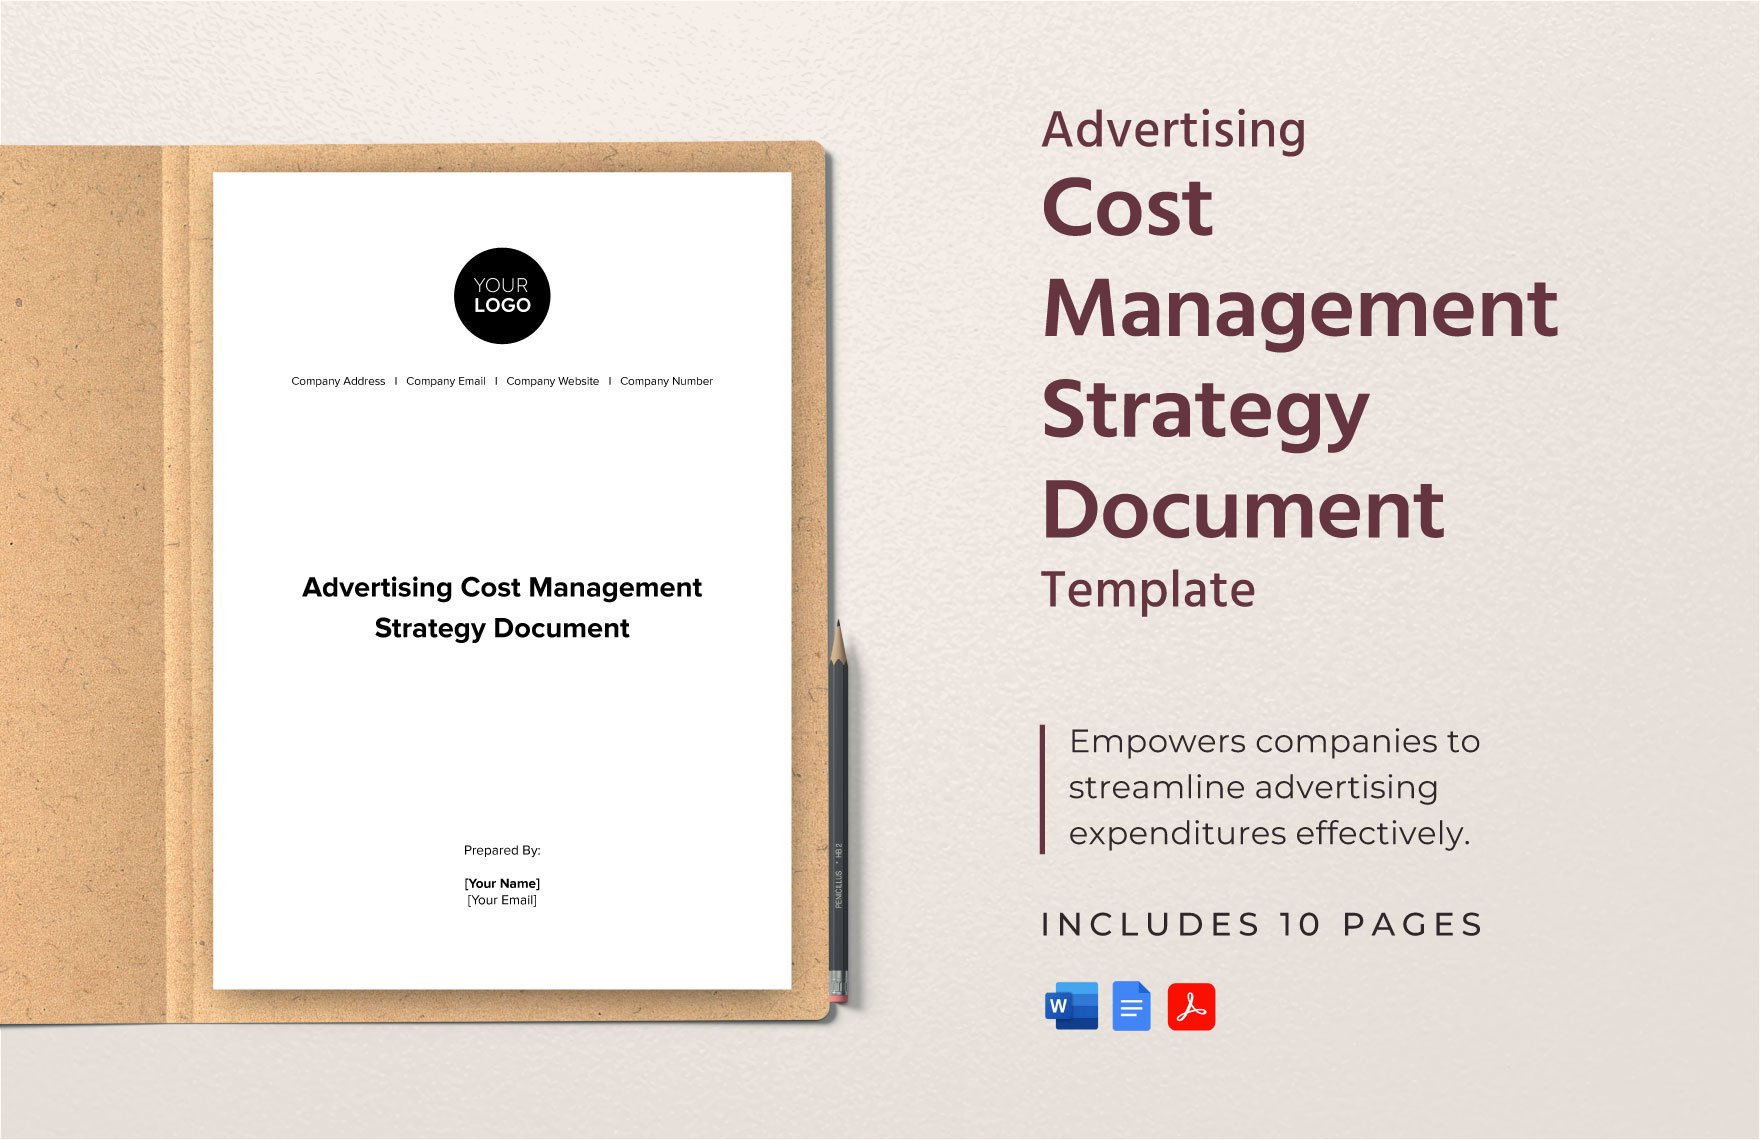 Advertising Cost Management Strategy Document Template in Word, Google Docs, PDF